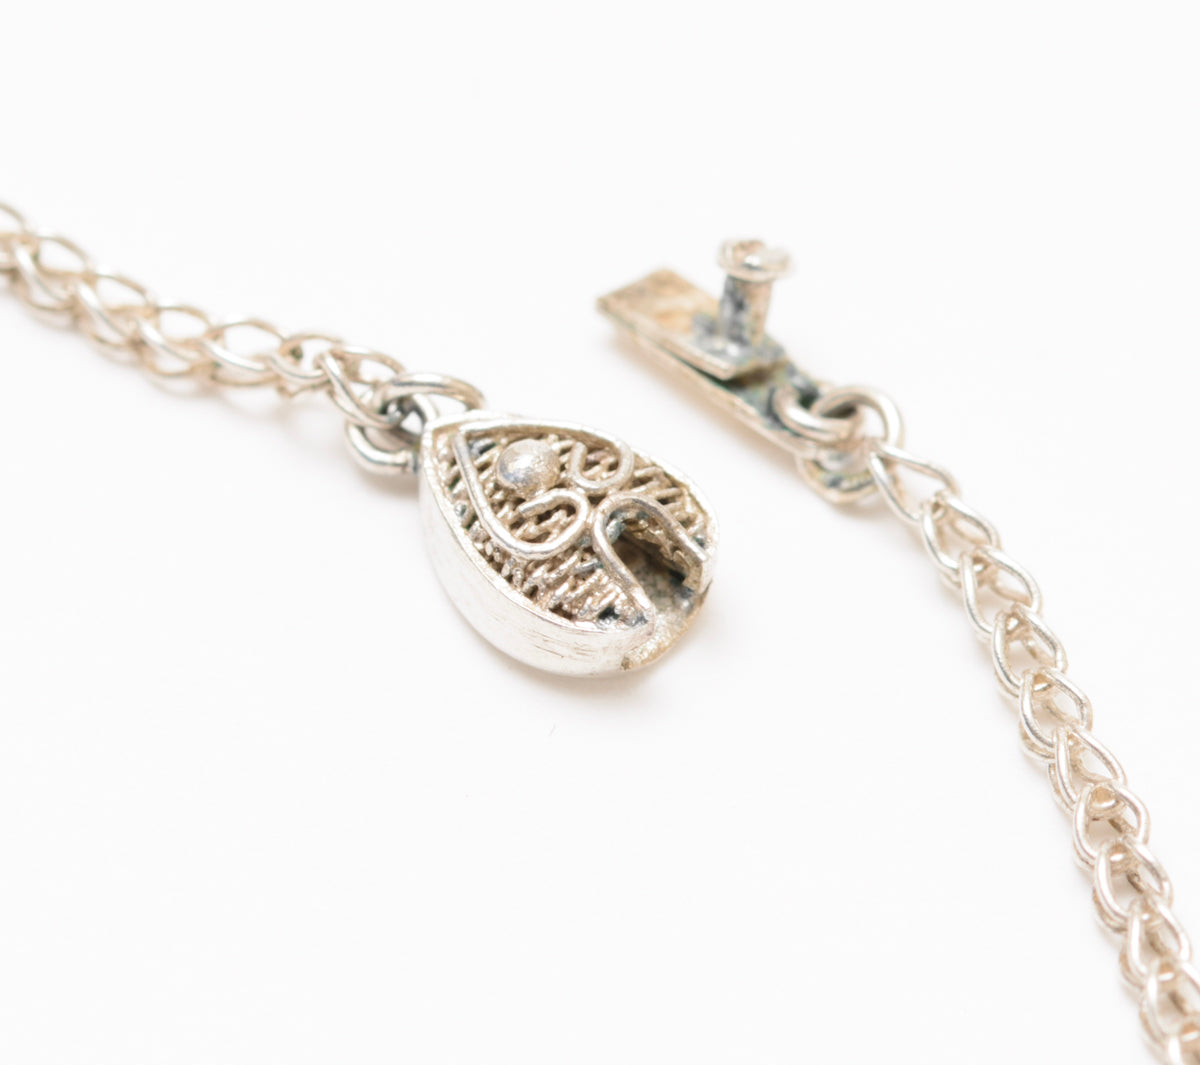 Vintage Sterling Silver Necklace With Enamel Butterflies & Filigree Clasp (A1835)